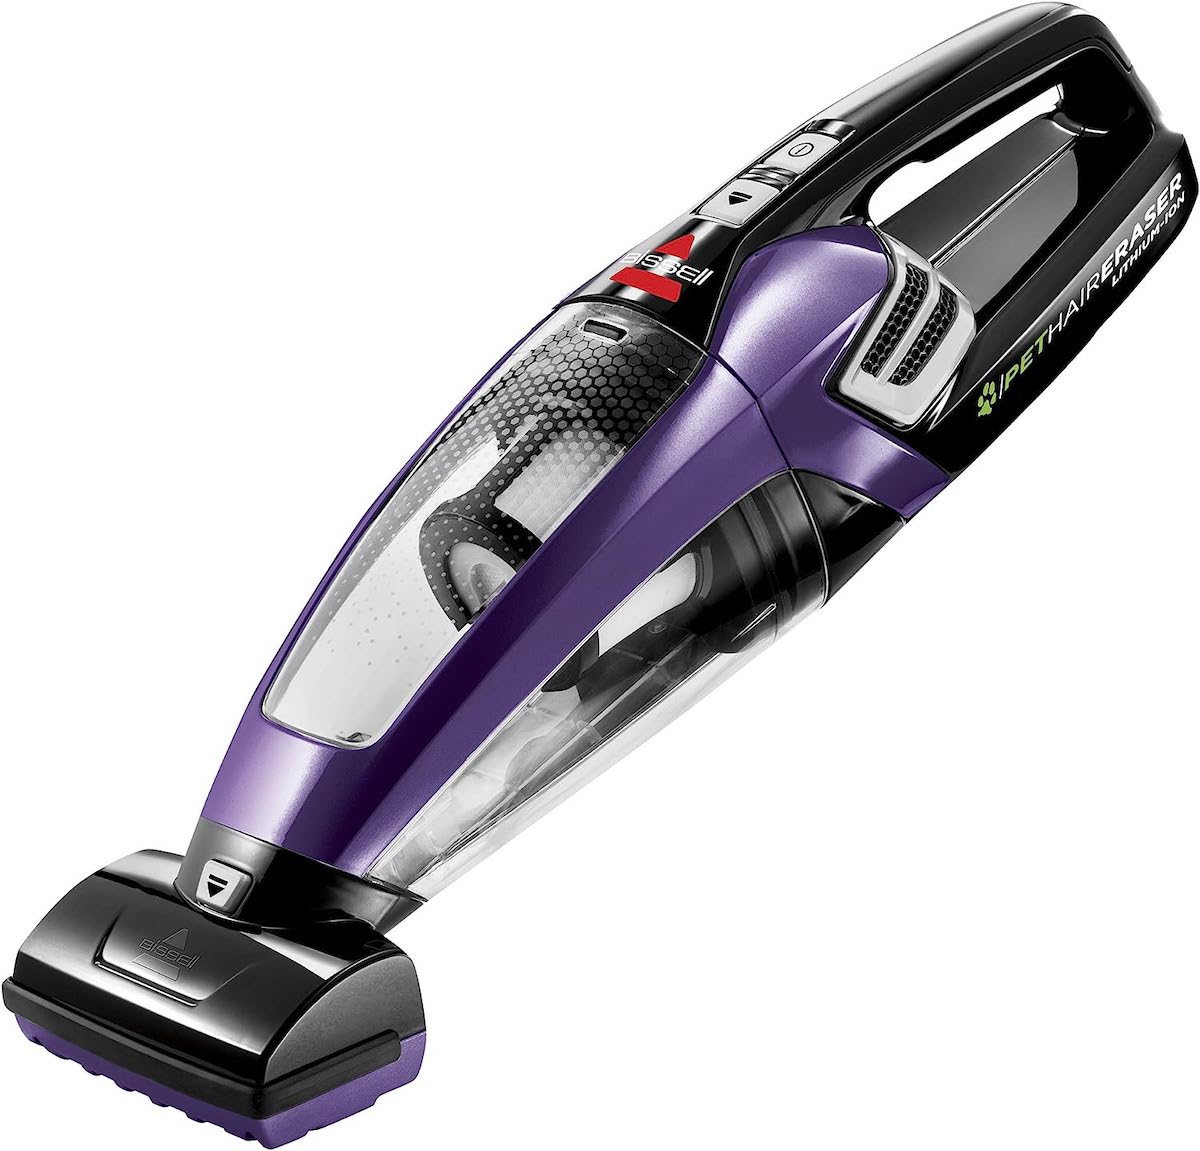 A Bissell Pet Hair Eraser Lithium Ion Cordless Hand Vacuum on a blank white background.